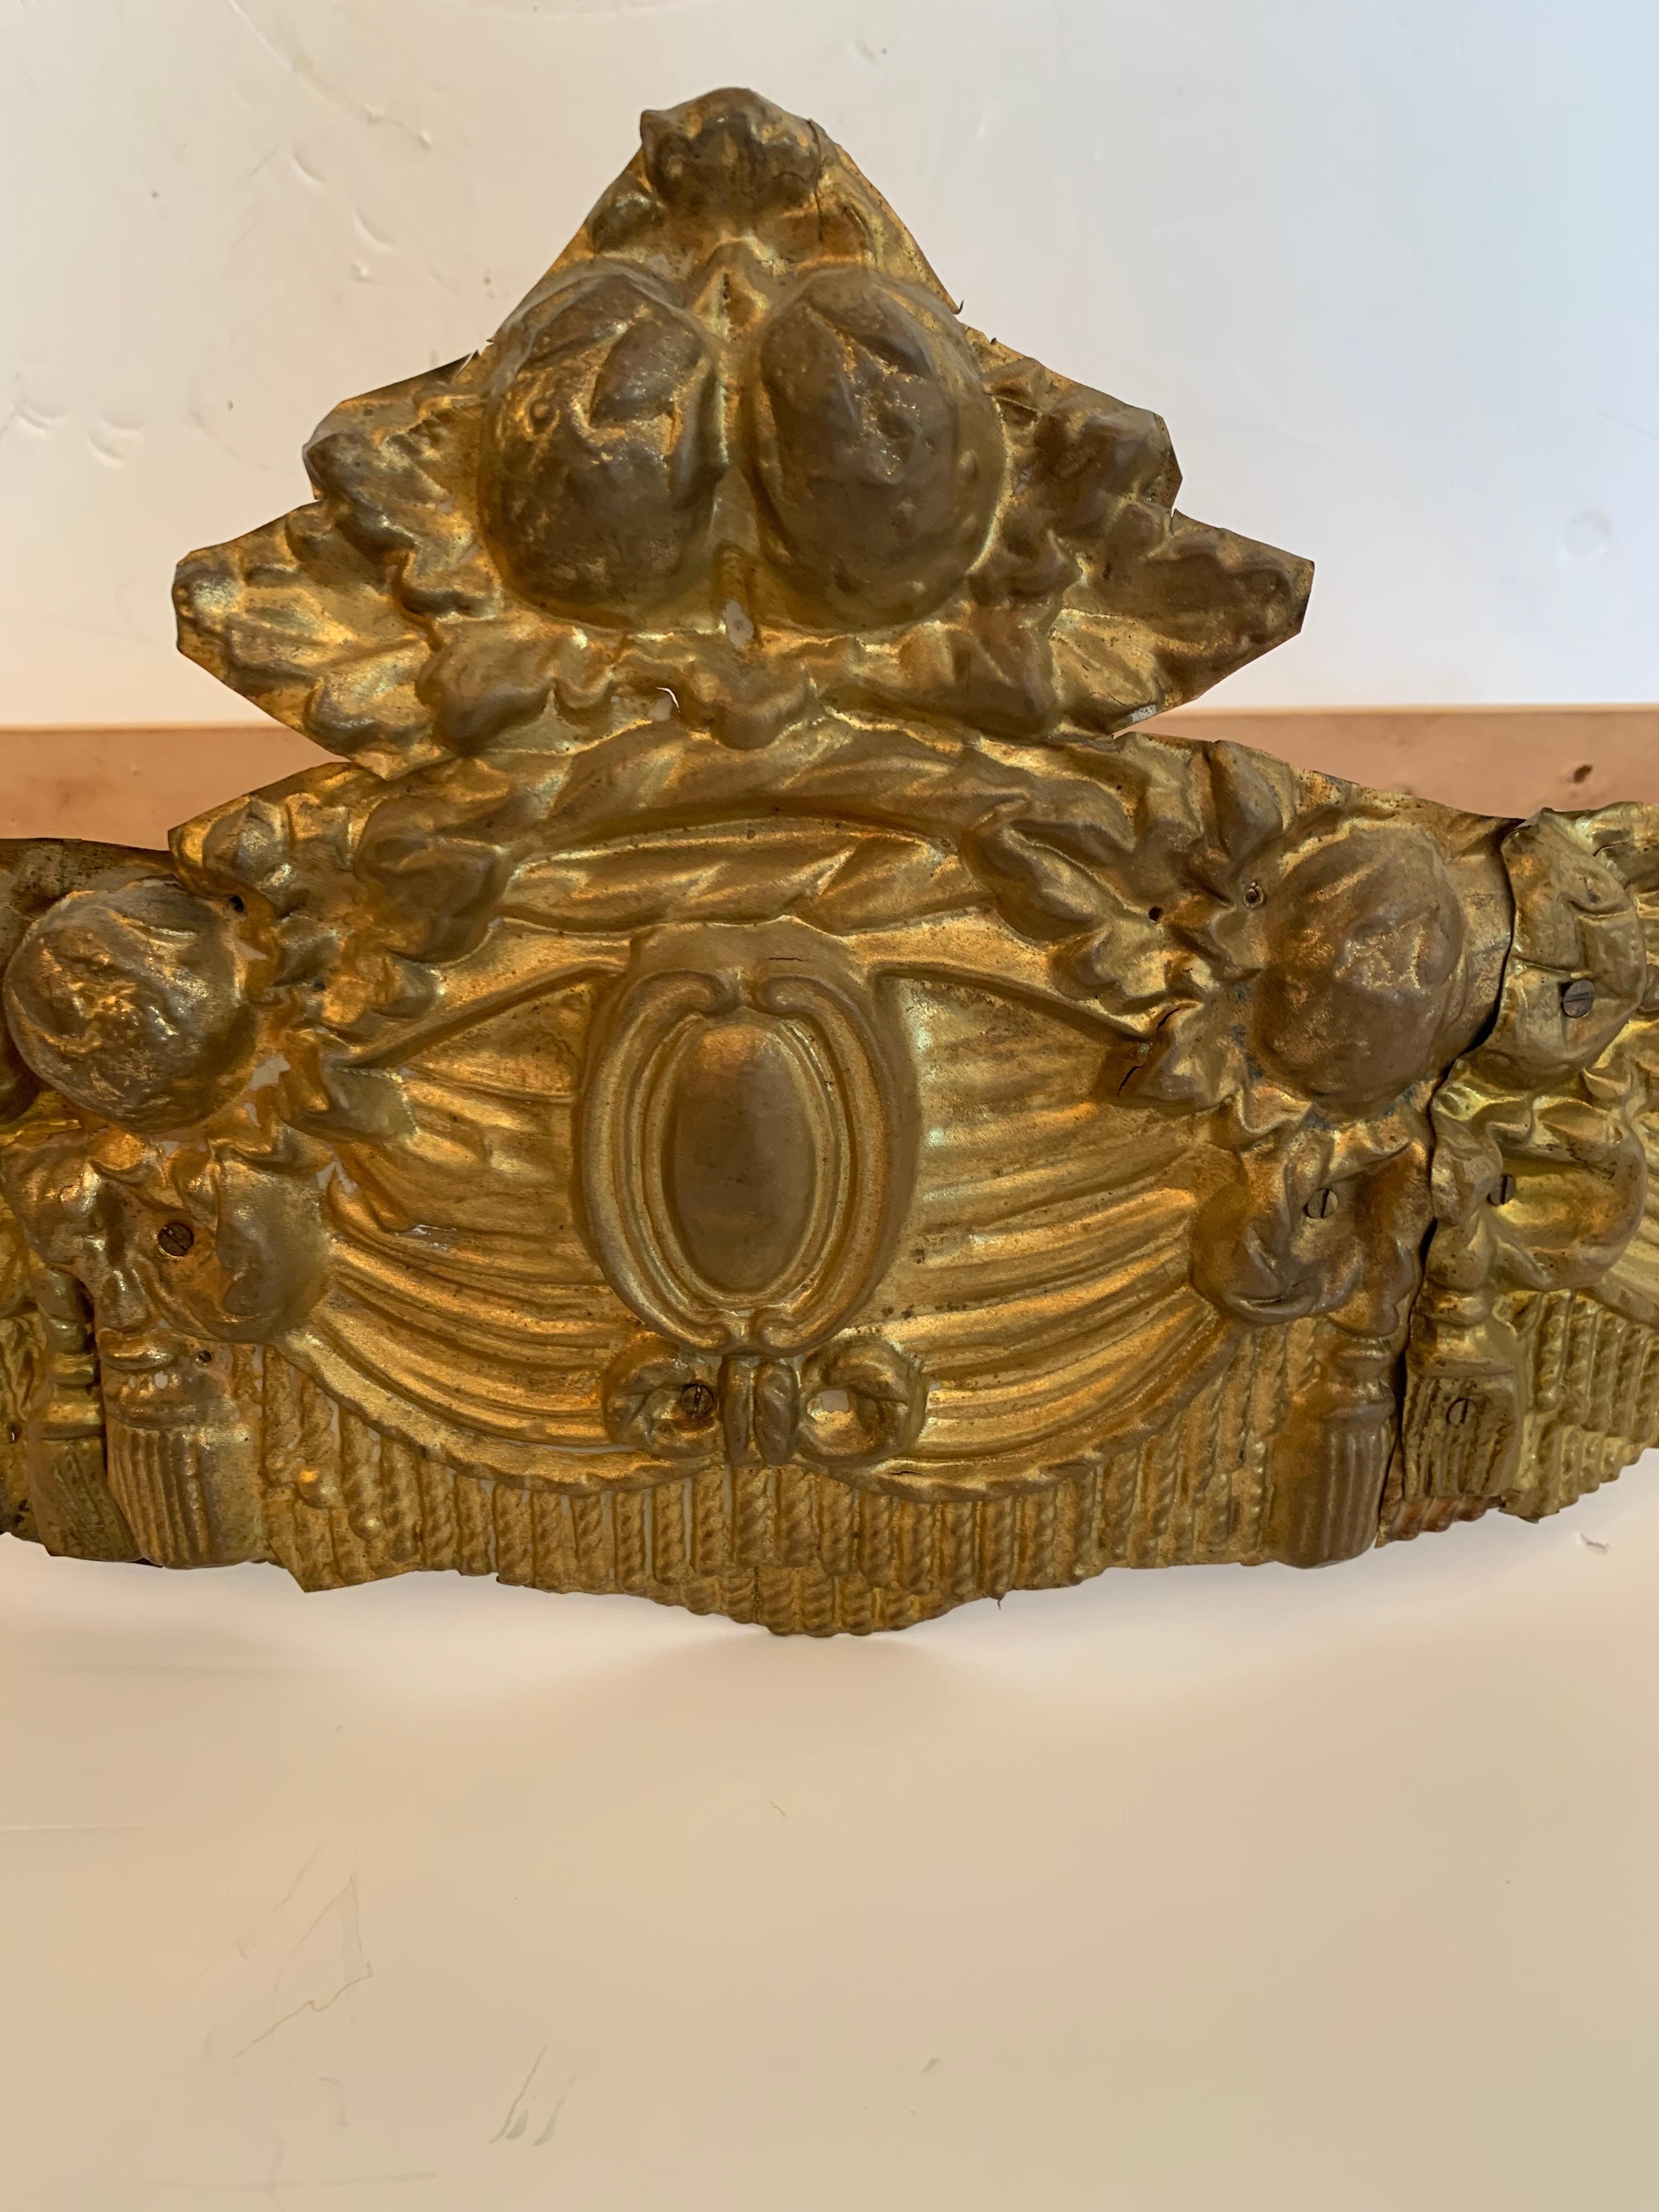 Sleep like royalty with this sweet little gilt metal bed crown. A close relative of the four poster canopy bed, the corona is meant to drape curtains over the bed, making it a focal point, but originally developed for more practical reasons. Drapery